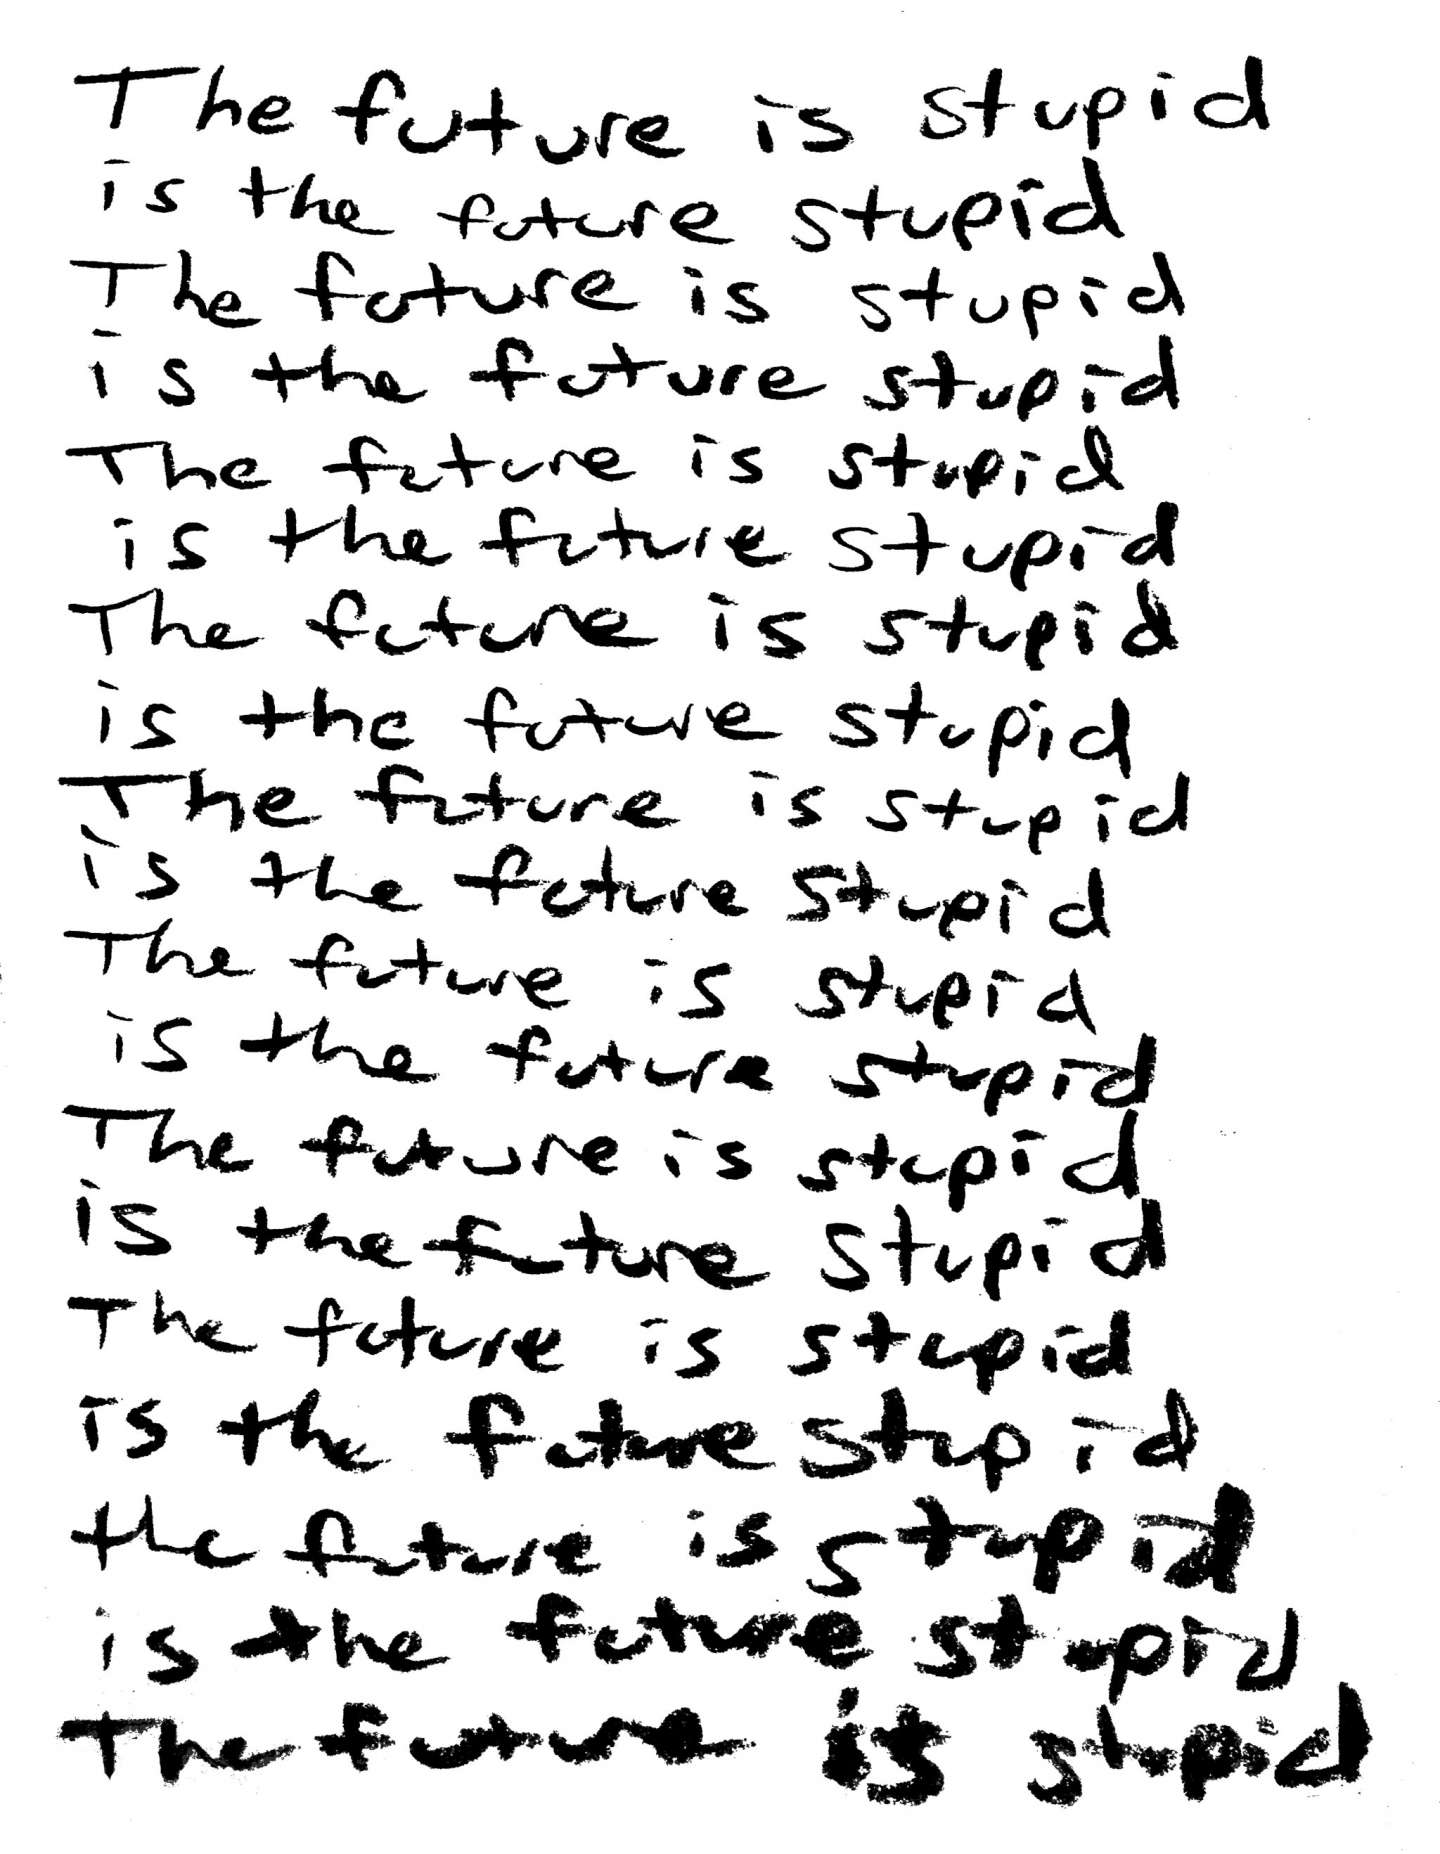 MESSAGES TO THE FUTURE